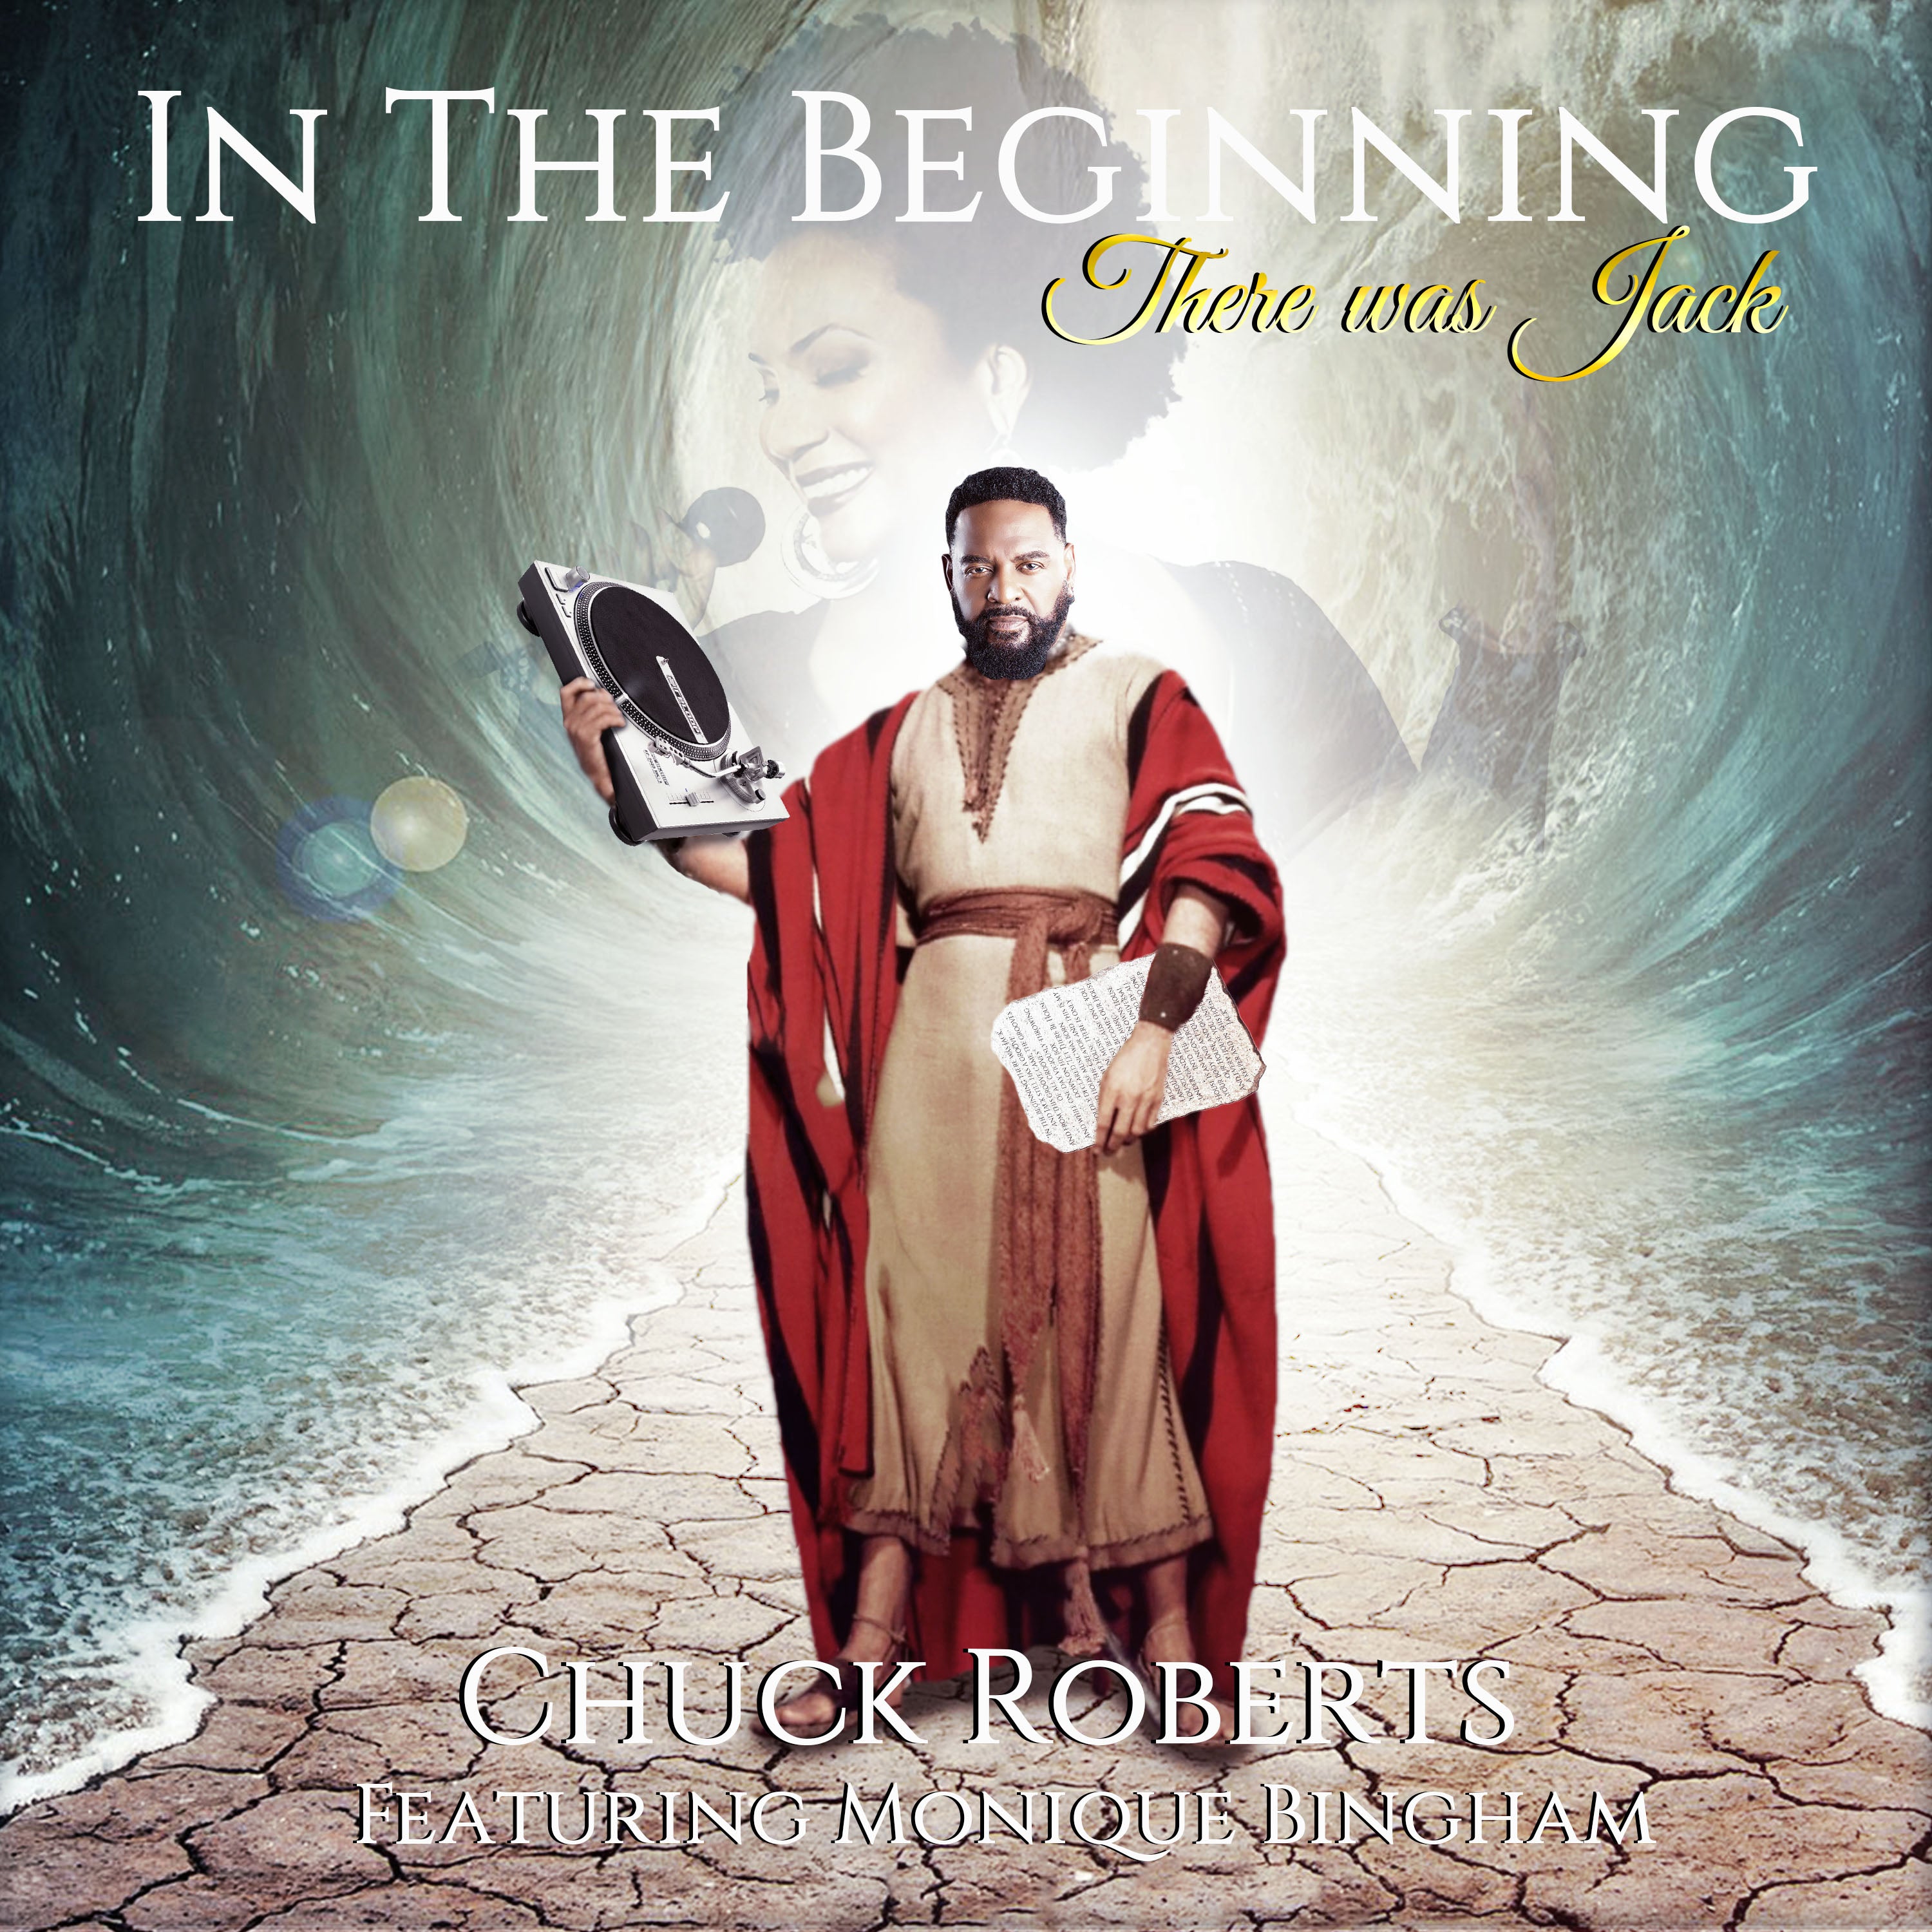 Video laden: In The Beginning There Was Jack by Chuck &quot;The Voice&quot; Roberts Featuring Monique Bingham